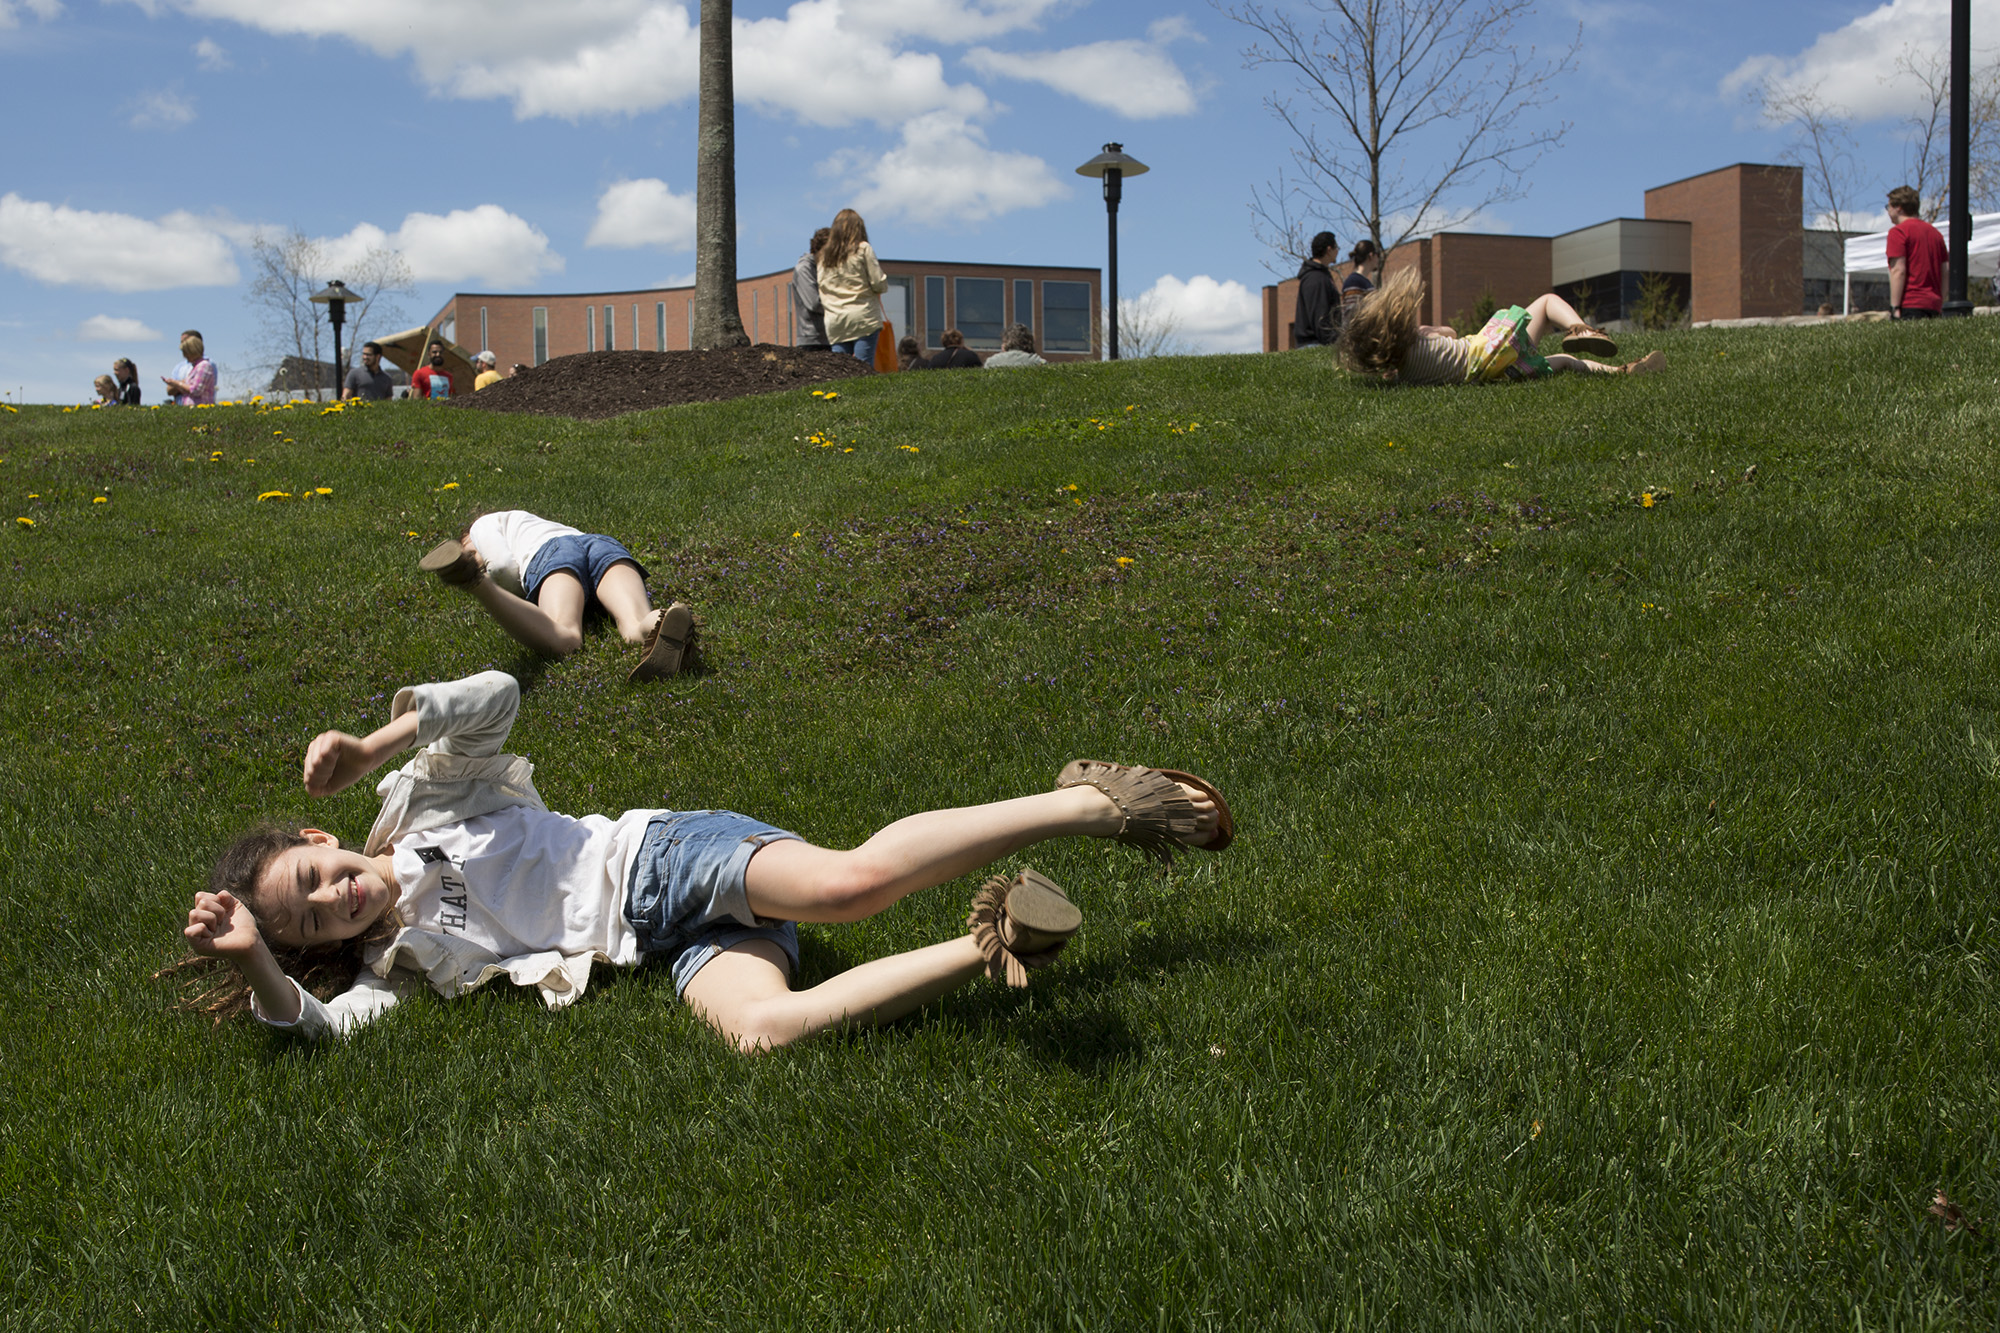 Anna Fitzgerald, 7, Rory Fitzgerald, 5, and Teagan Fitzgerald, 3, roll down a hill near Global Village during Imagine RIT: Innovation and Creativity Festival on the Rochester Institute of Technology campus in Rochester, N.Y., May 7, 2016. (Photo by Bridget Fetsko) #imaginerit #ritpj